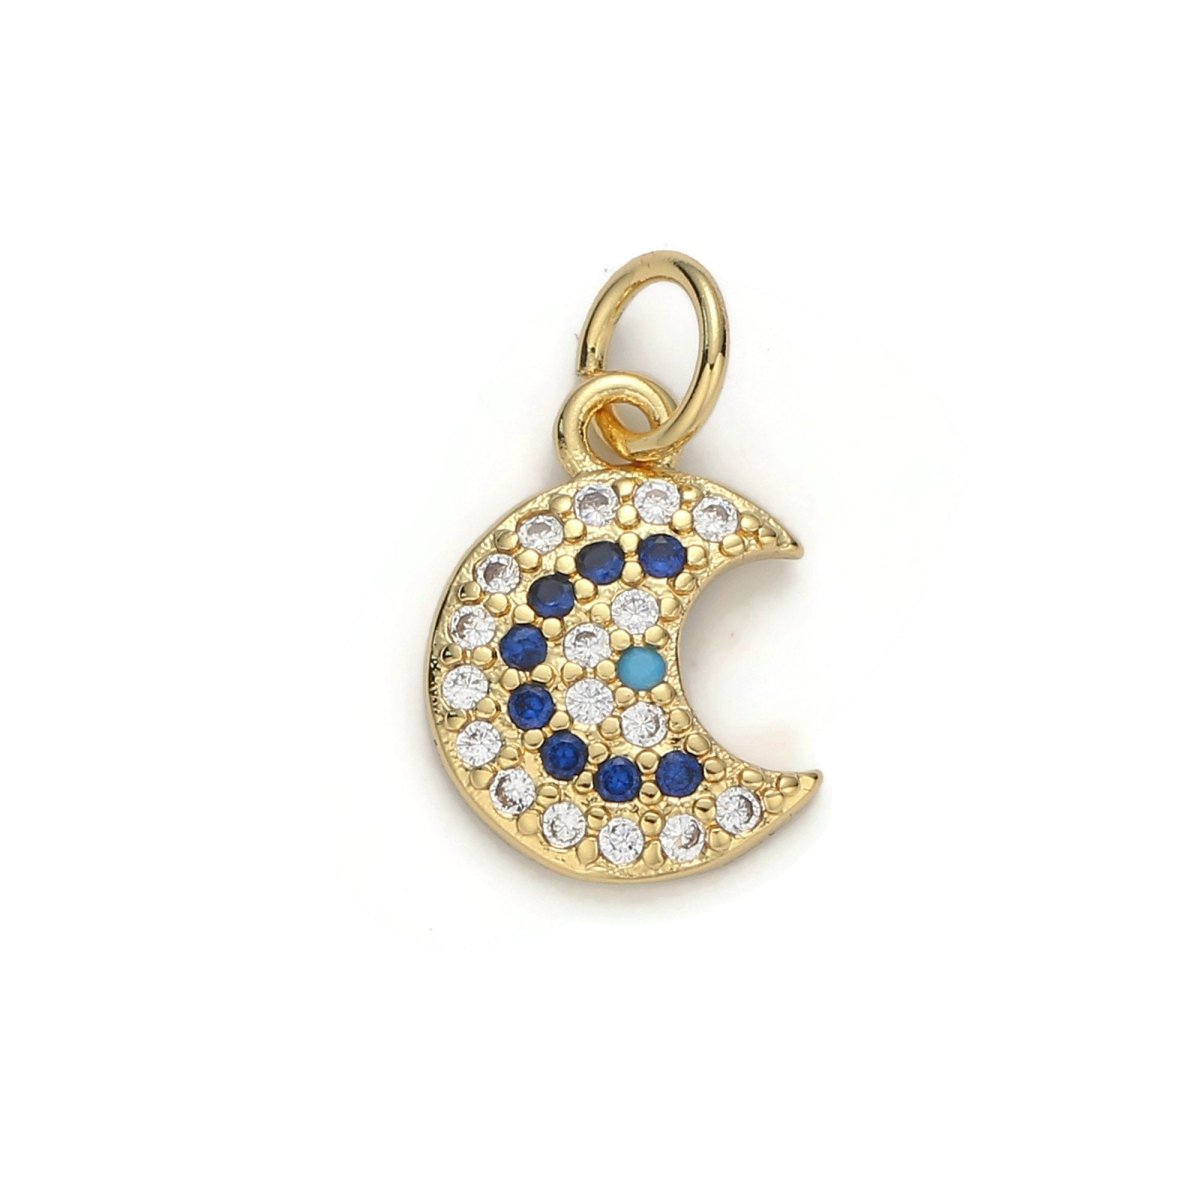 24k Gold Filled Micro Pave Moon Charm, Cubic Zirconia Moon Pendant Charm, Gold Filled Charm, For DIY Jewelry D-044 - DLUXCA